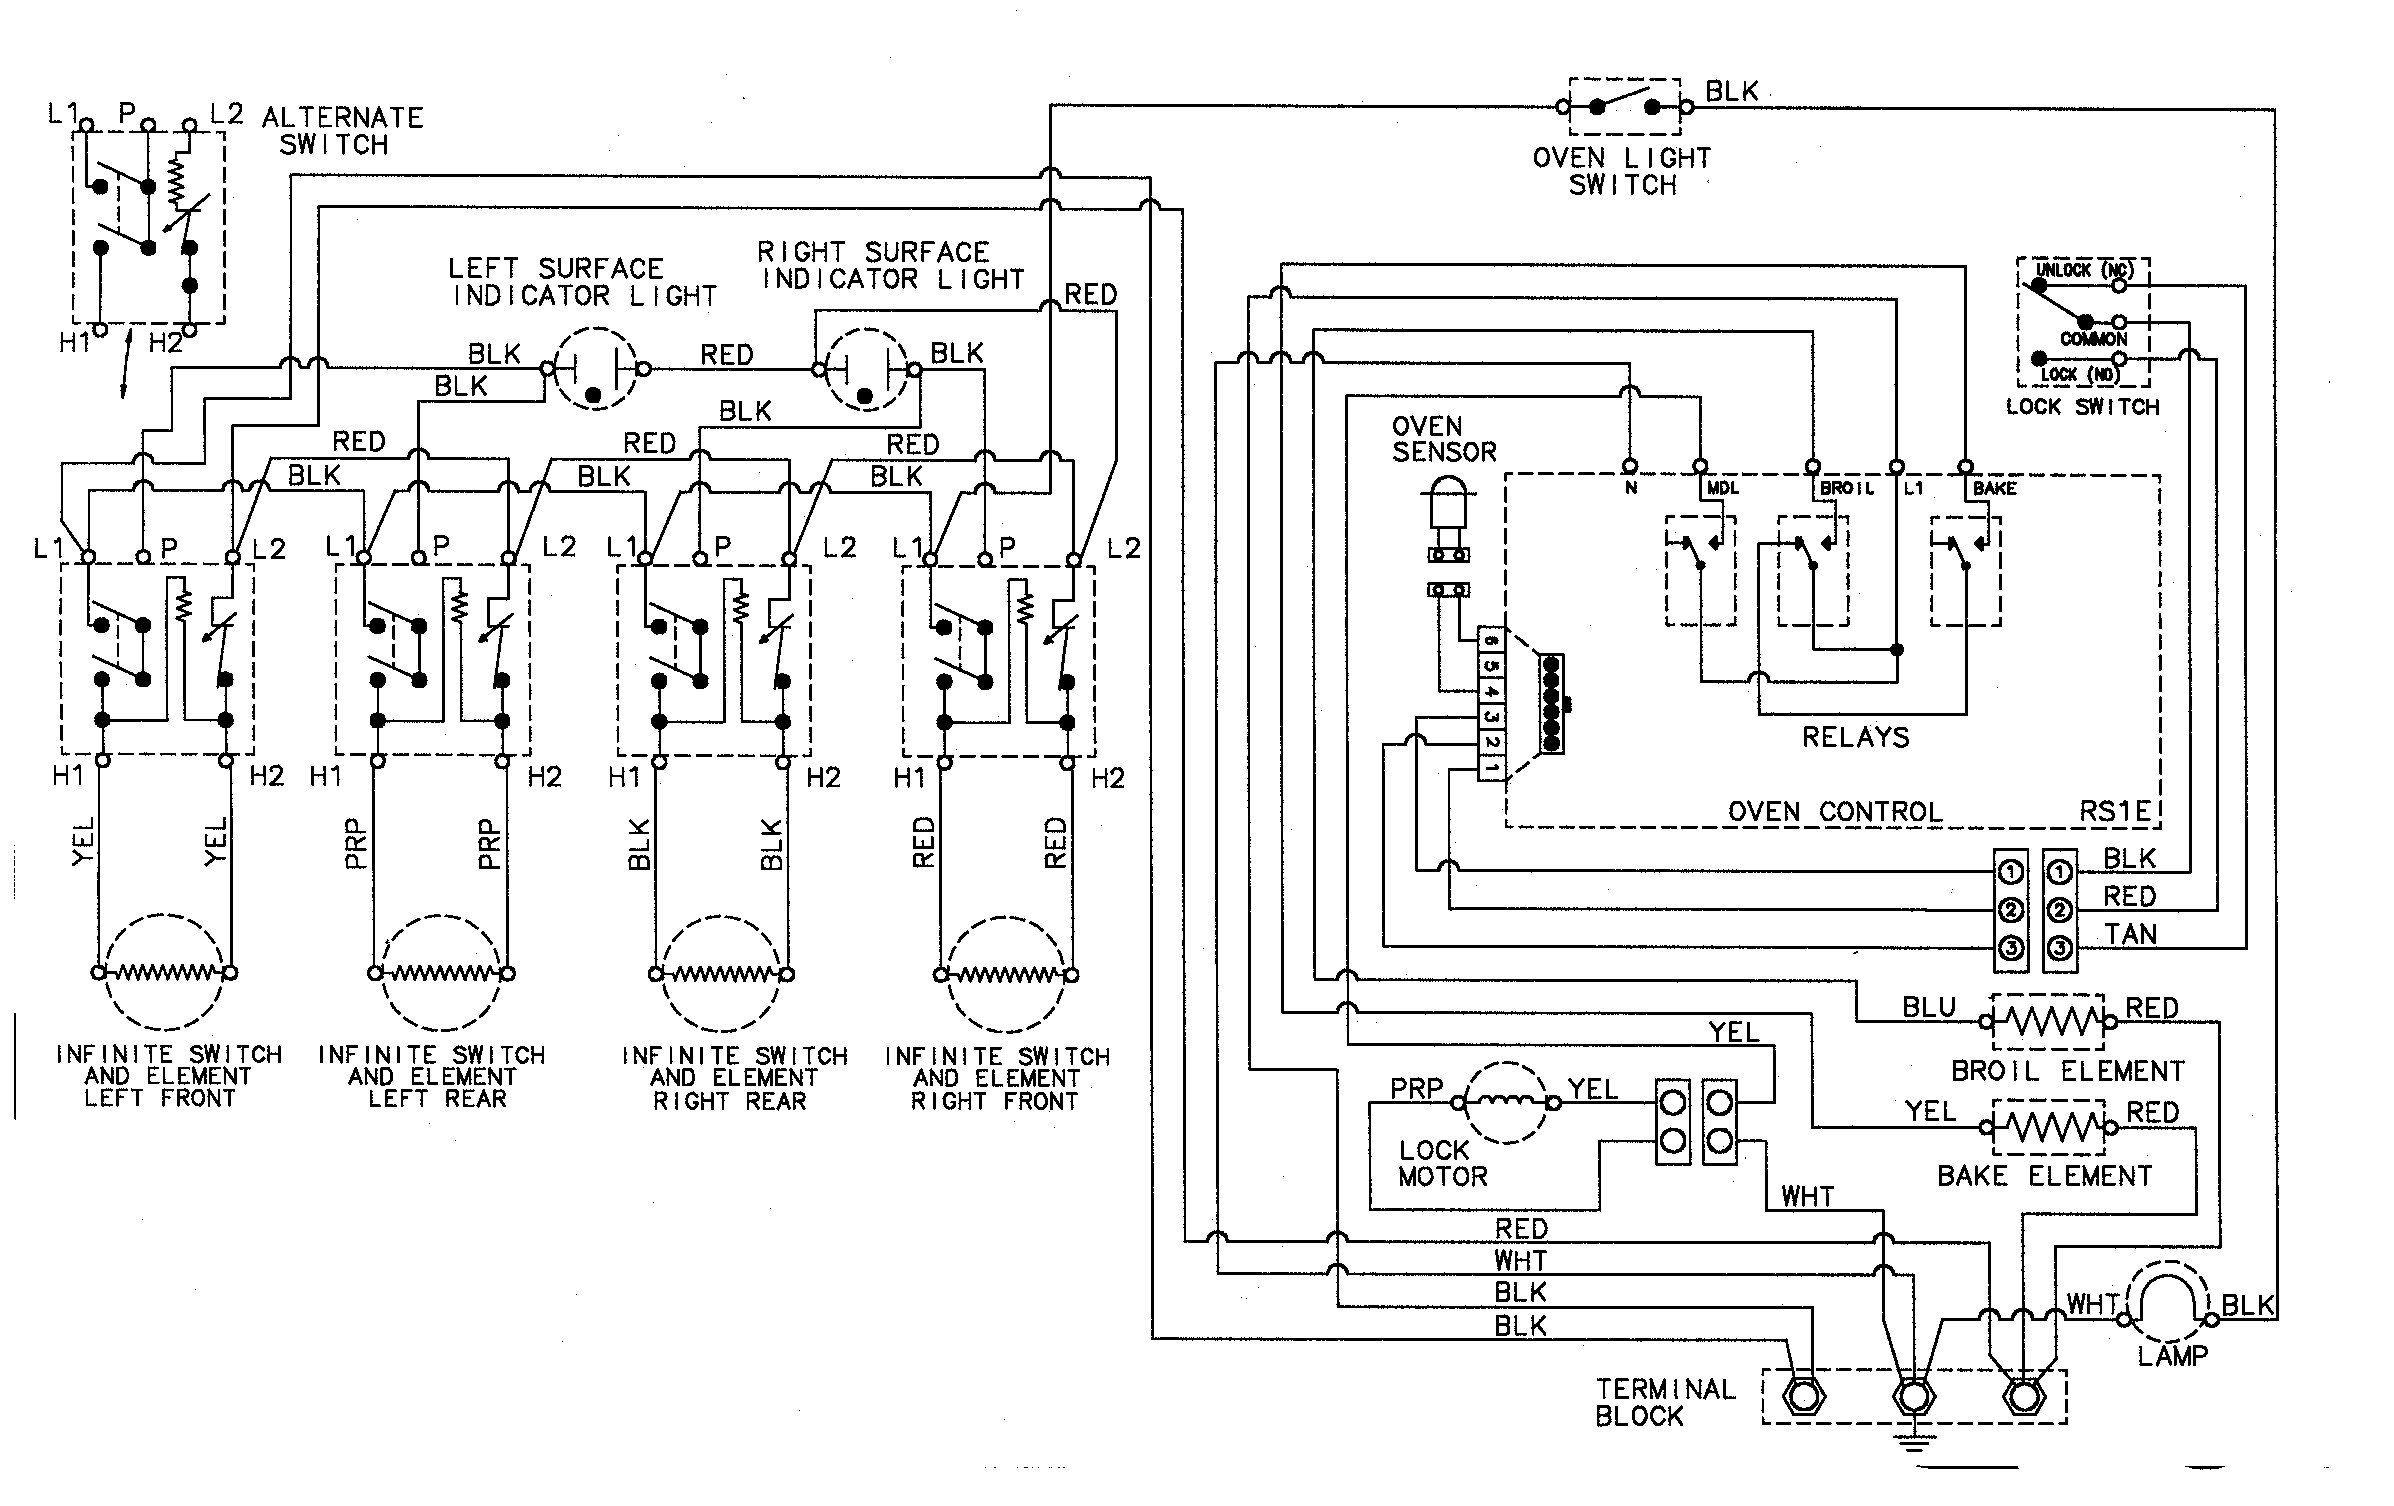 Defy 119 Plug In At Electric Stove Wiring Diagram - Wiring Diagram - Electric Stove Wiring Diagram